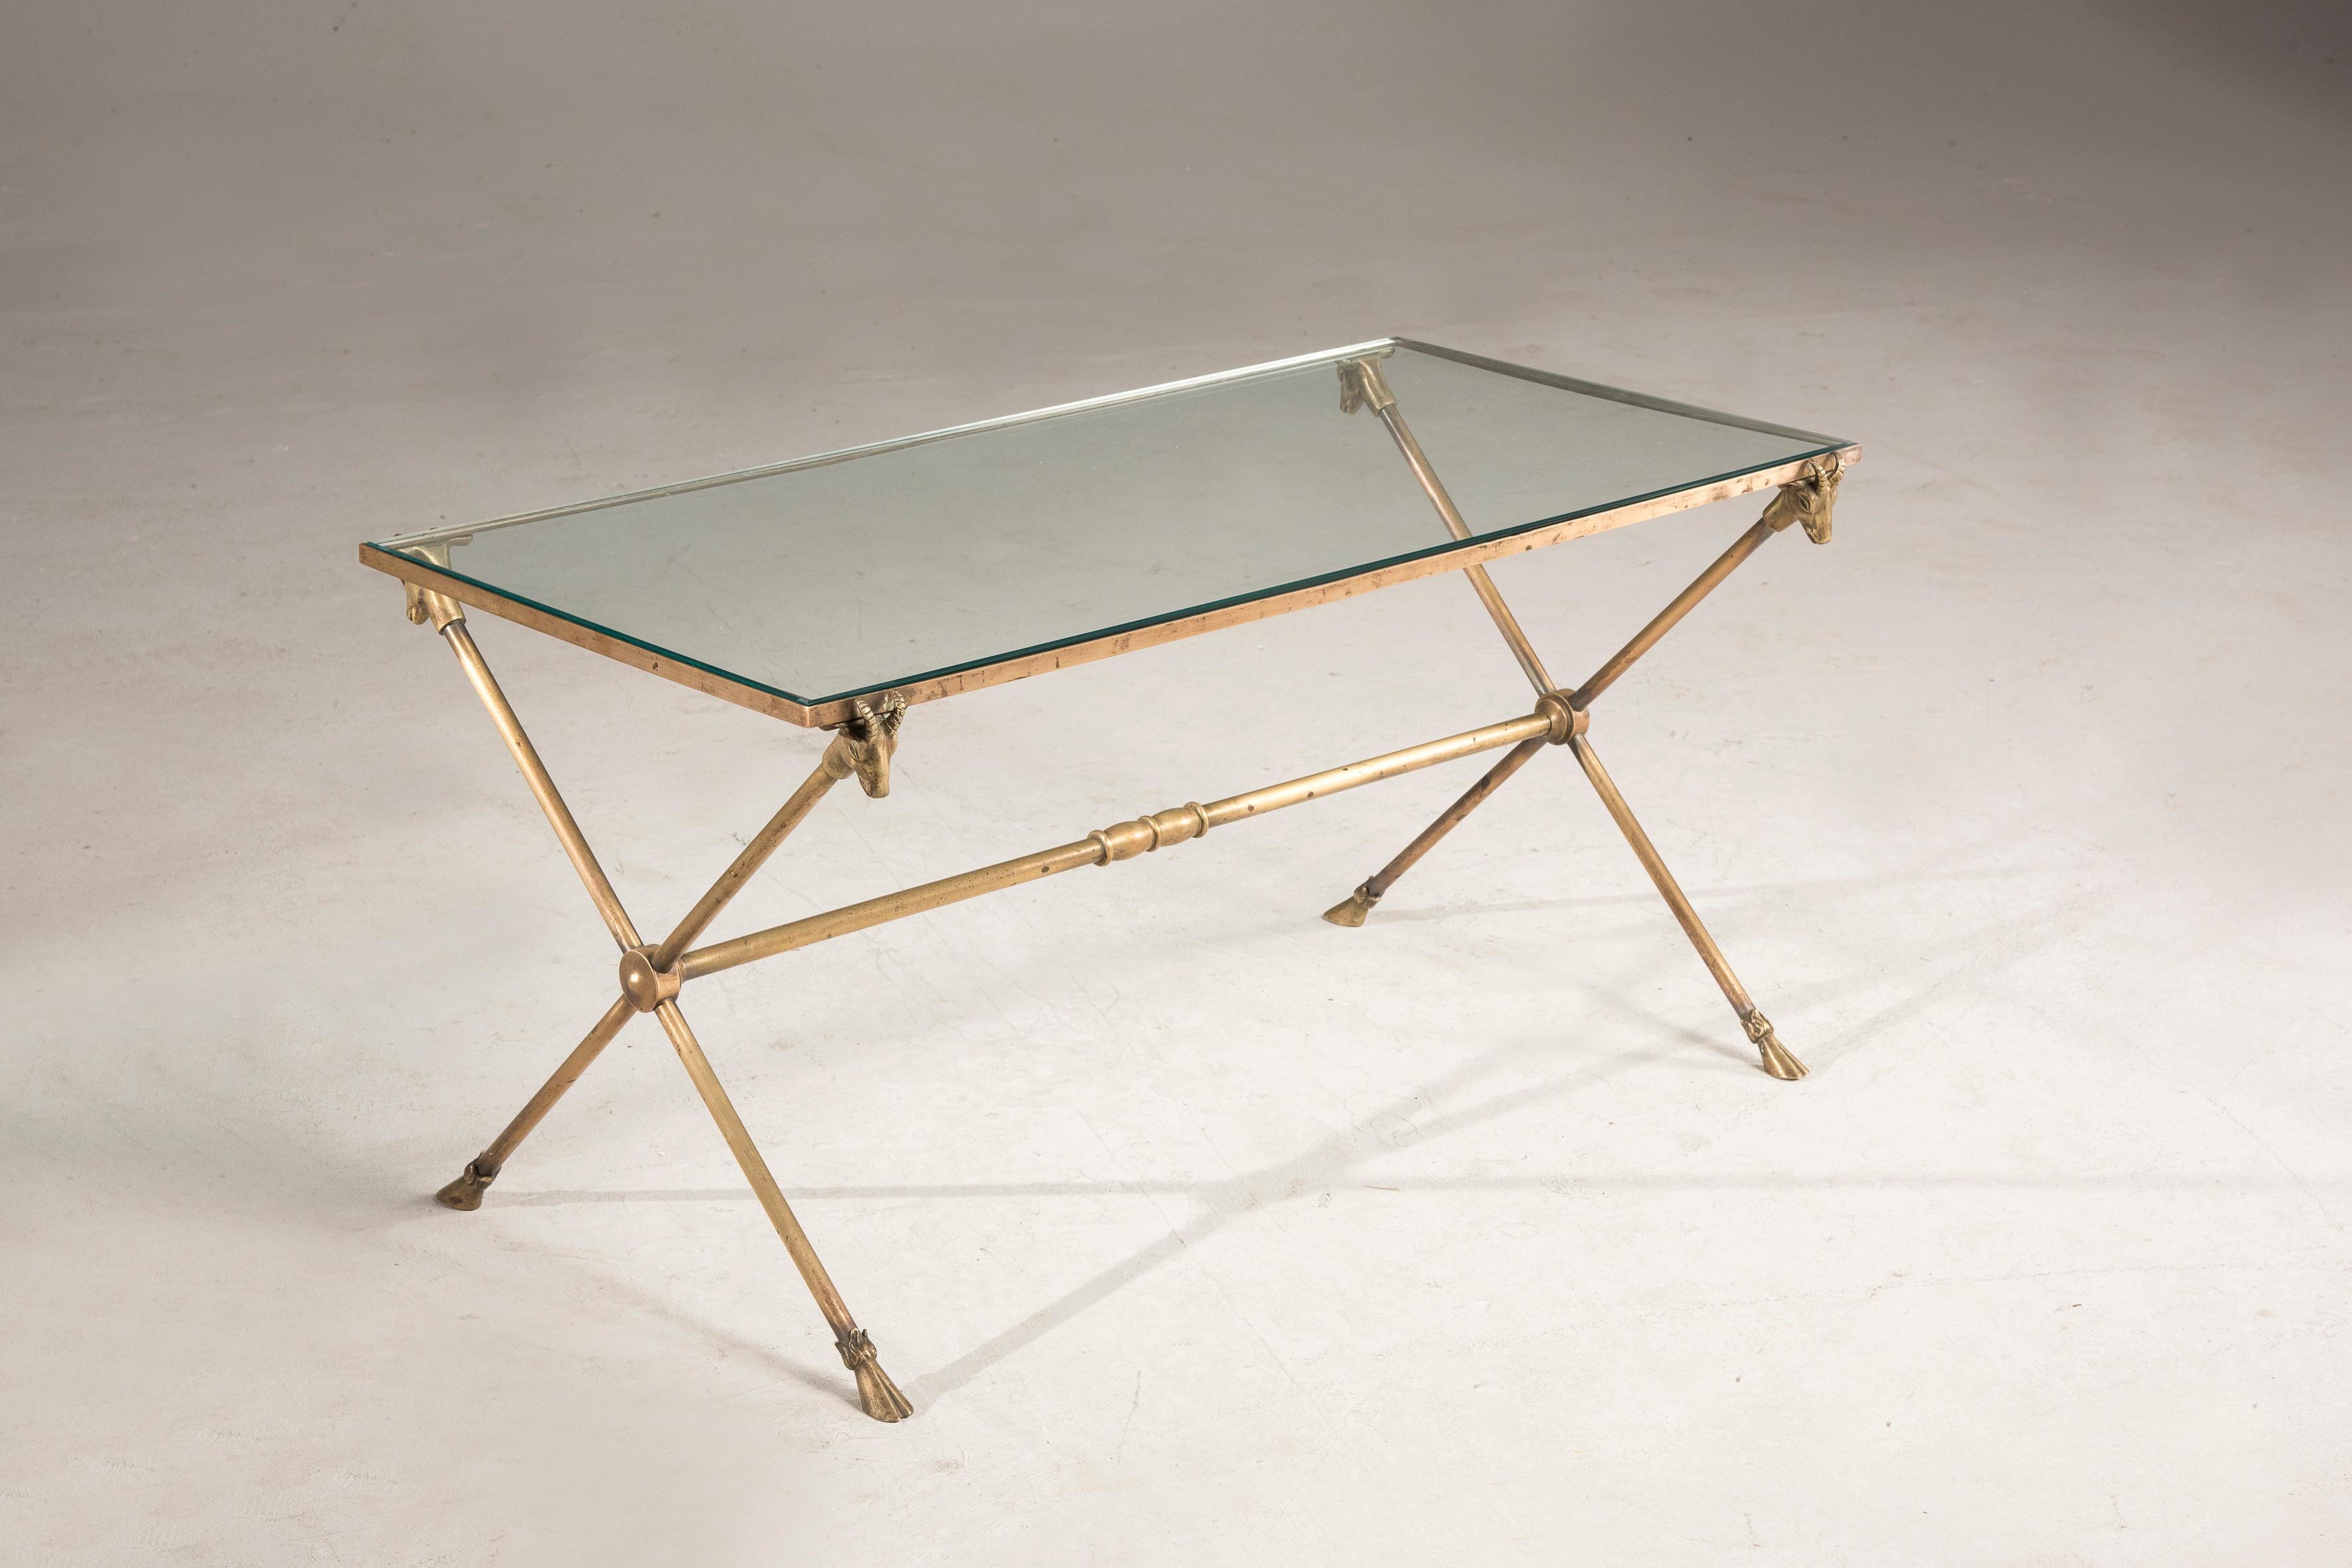 Art Deco brass and glass coffee table from France from 1940s period.

Perfect conditions. No restoration needed, only cleaning of the brass.

Measures 42 x 85 h 43 cm.

Coffee Table in brass and glass, France.

Perfect storage conditions.

Measures